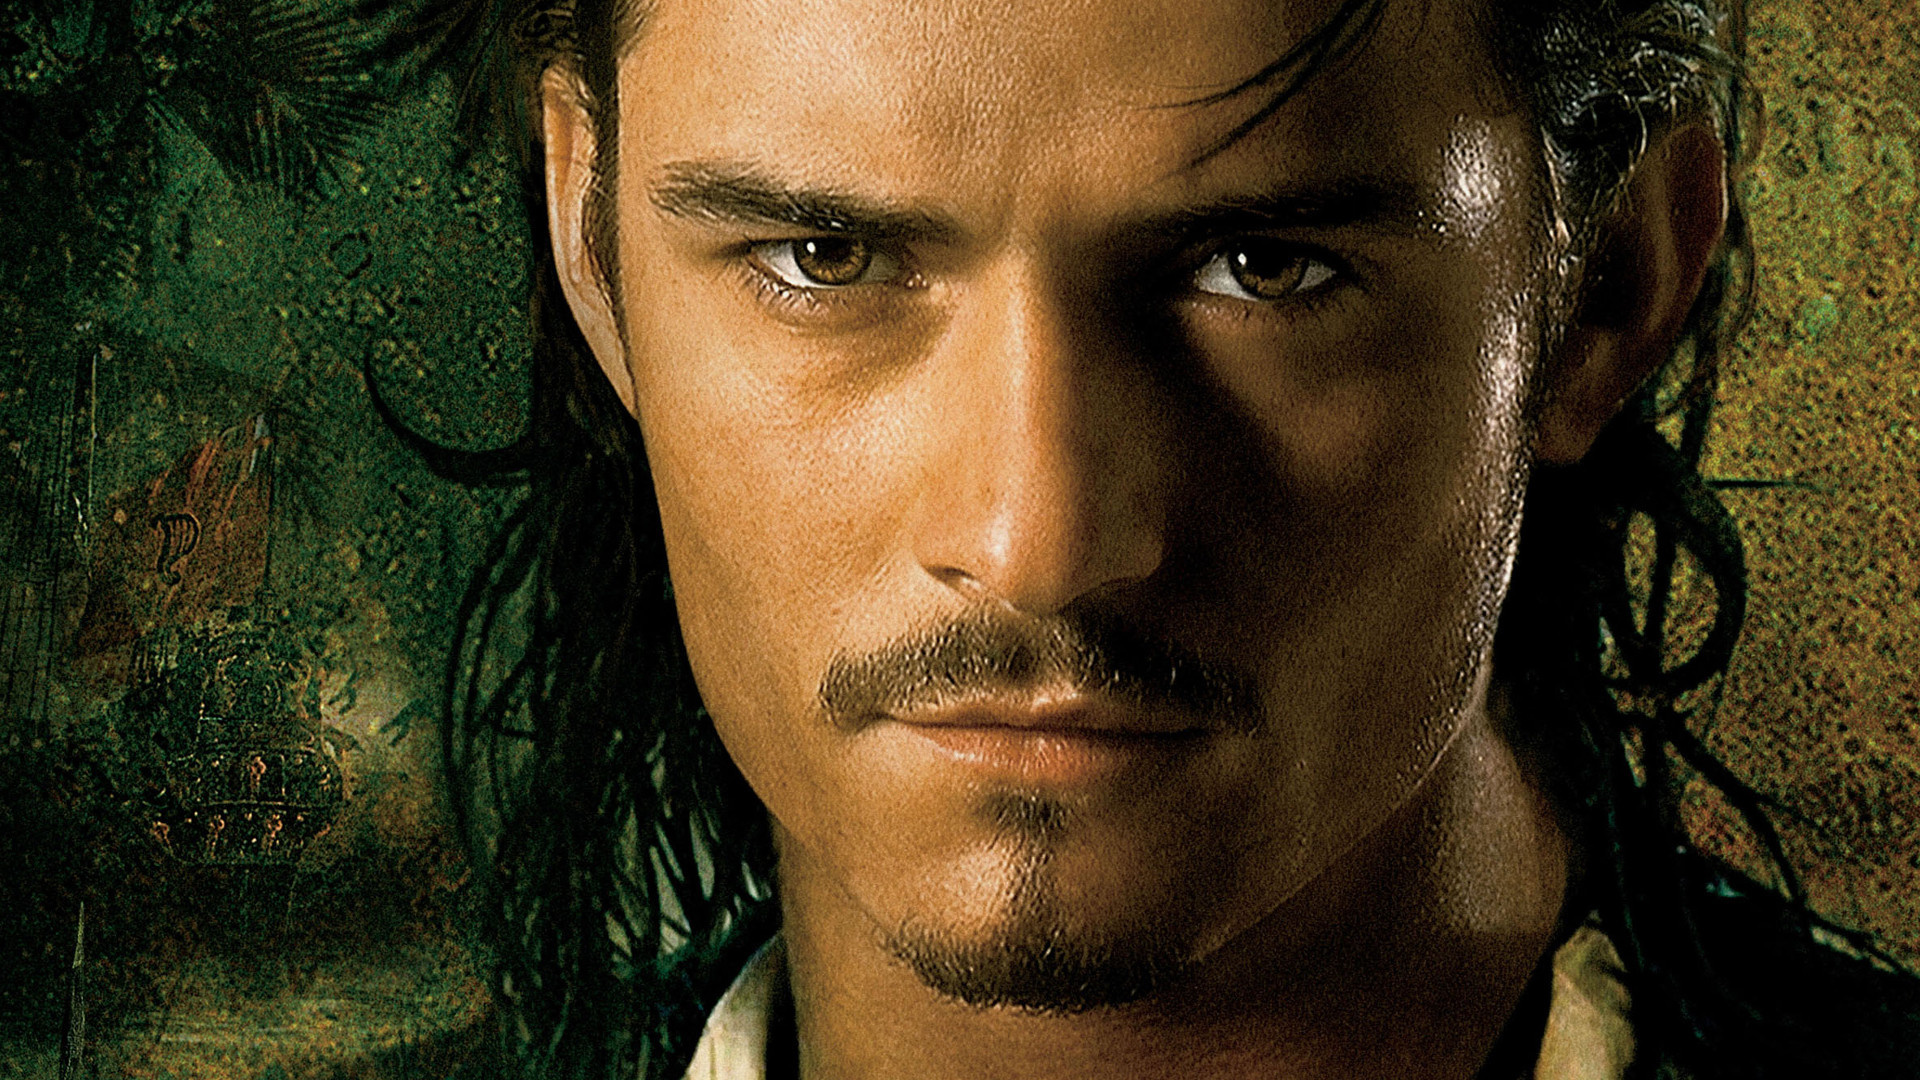 Pirates of the Caribbean, Dead Man's Chest, HD wallpaper, Background image, 1920x1080 Full HD Desktop